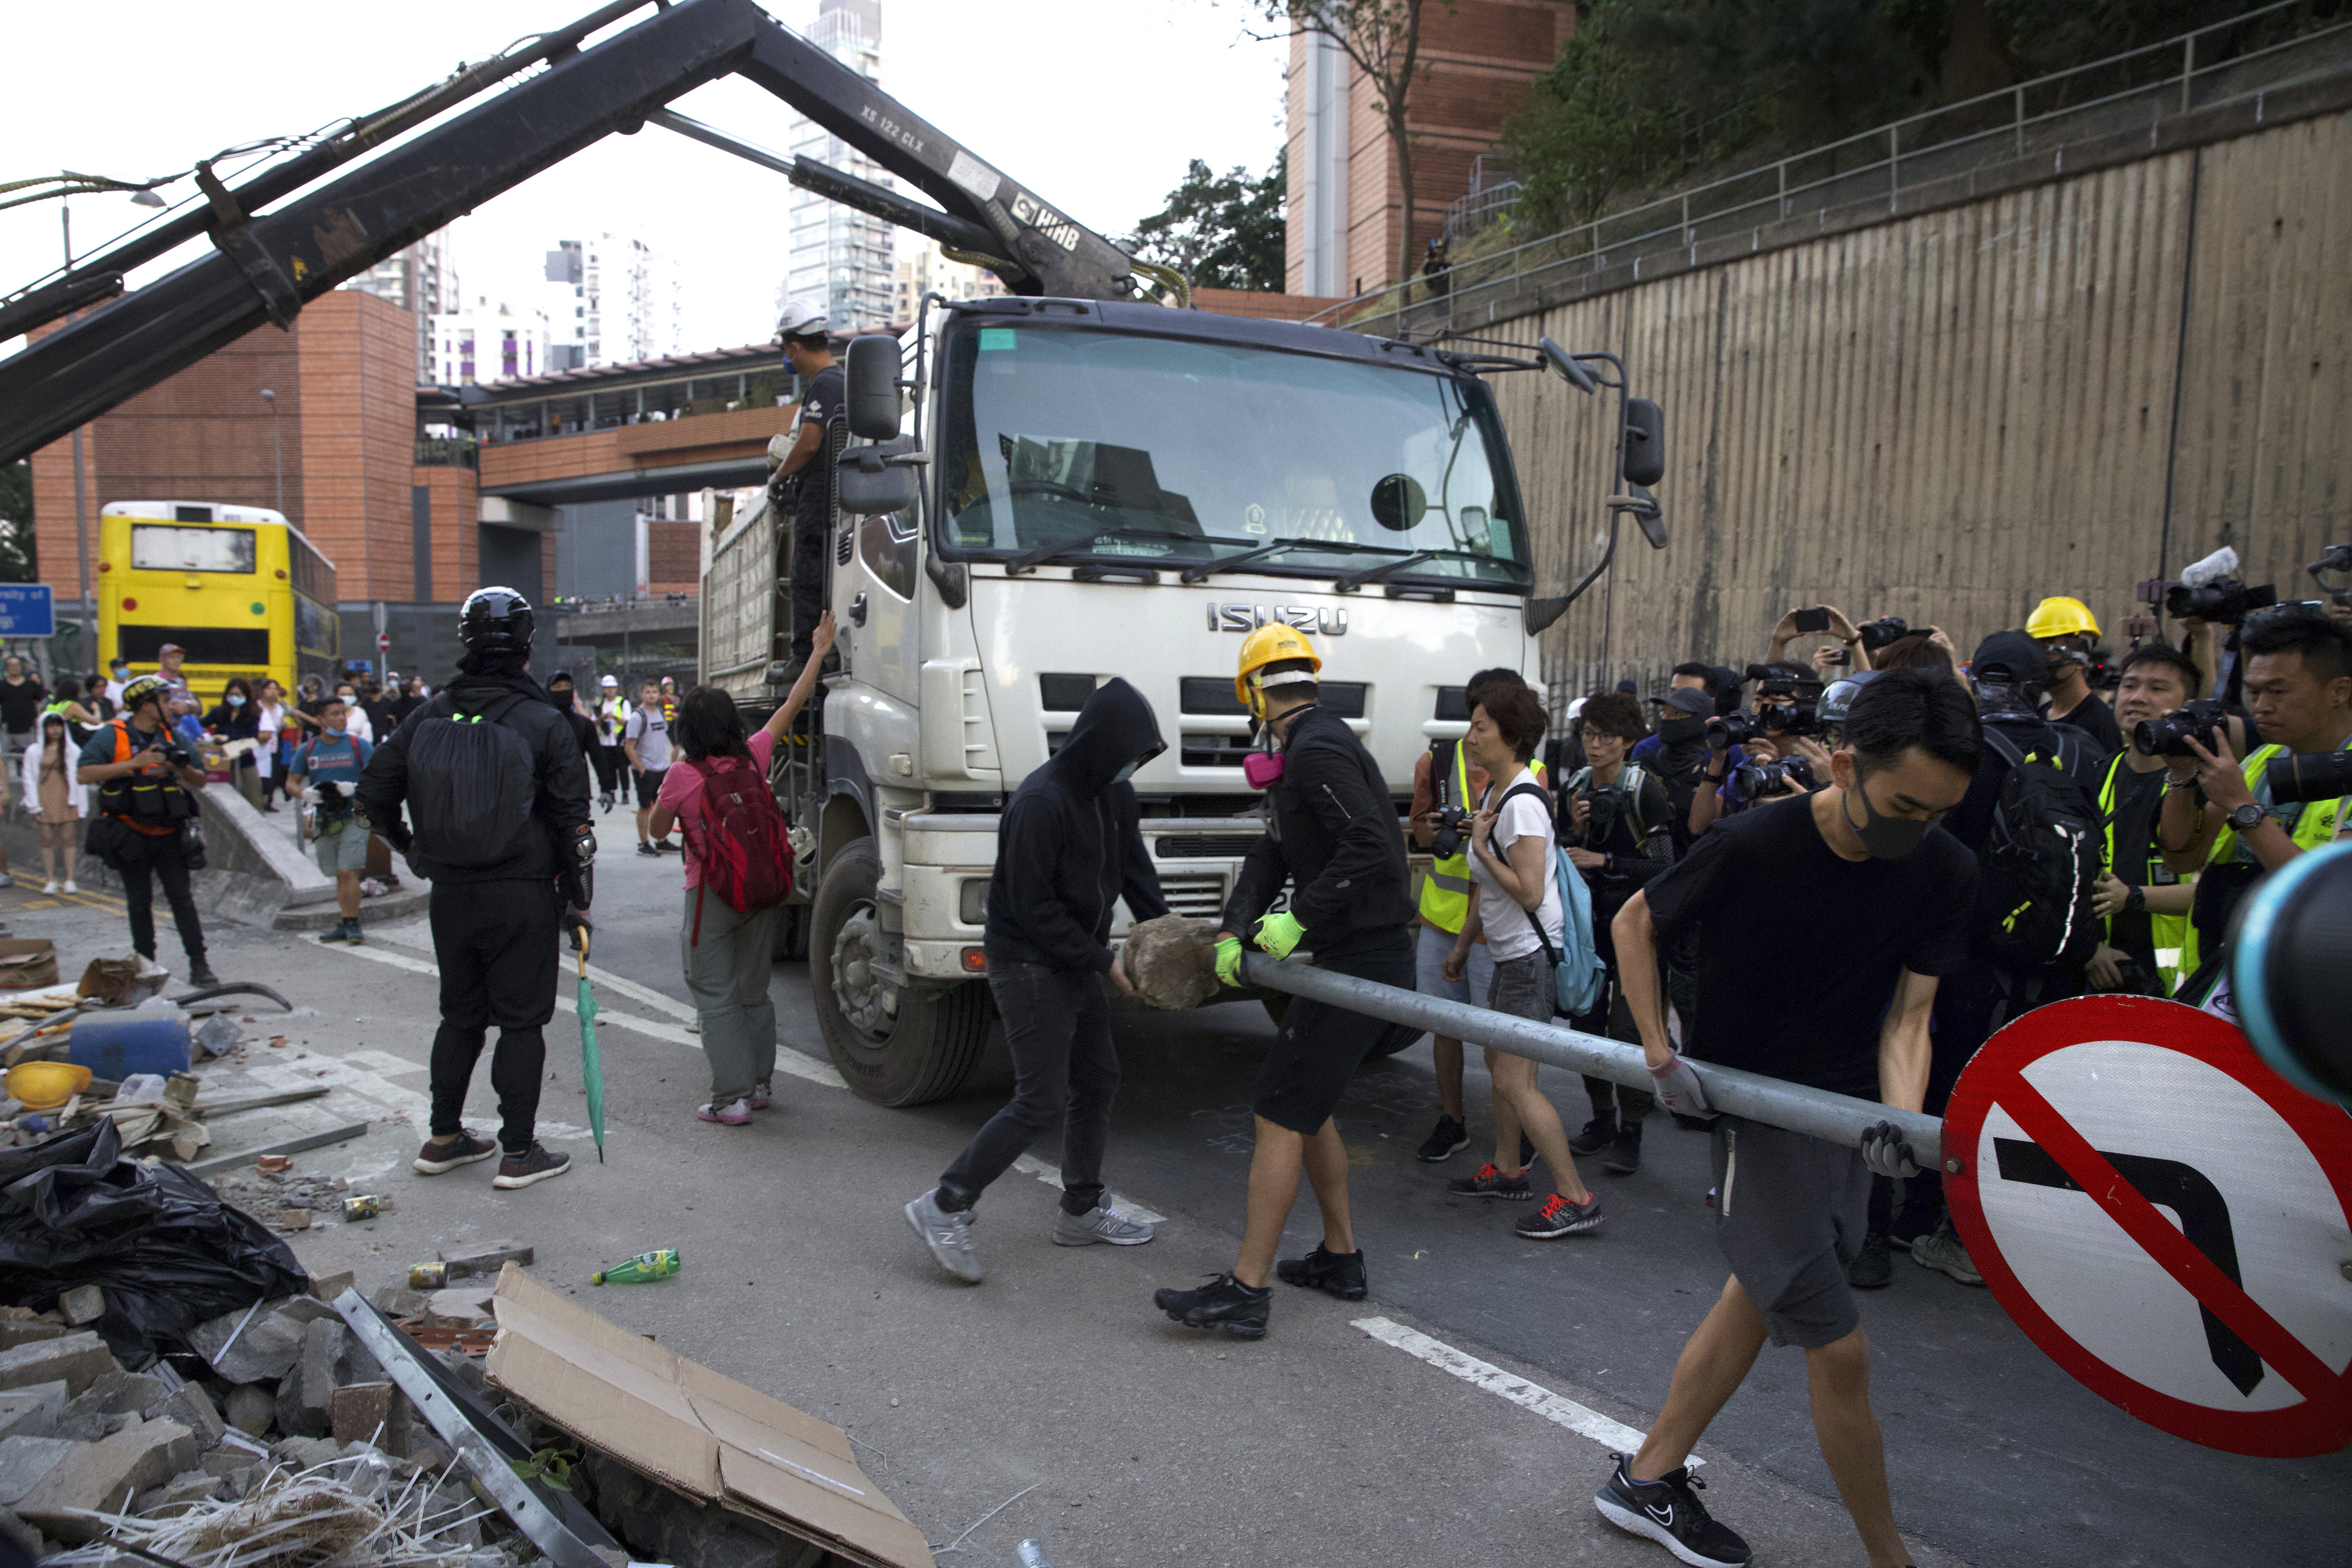 Protestors try to take back debris for road barricades that was cleared away by local residents near the University of Hong Kong in Hong Kong, Saturday, Nov. 16, 2019. Rebellious students and anti-government protesters abandoned their occupation of nearly all of Hong Kong's universities Saturday after a near weeklong siege by police, but at least one major campus remained under control of demonstrators. (AP Photo/Ng Han Guan)